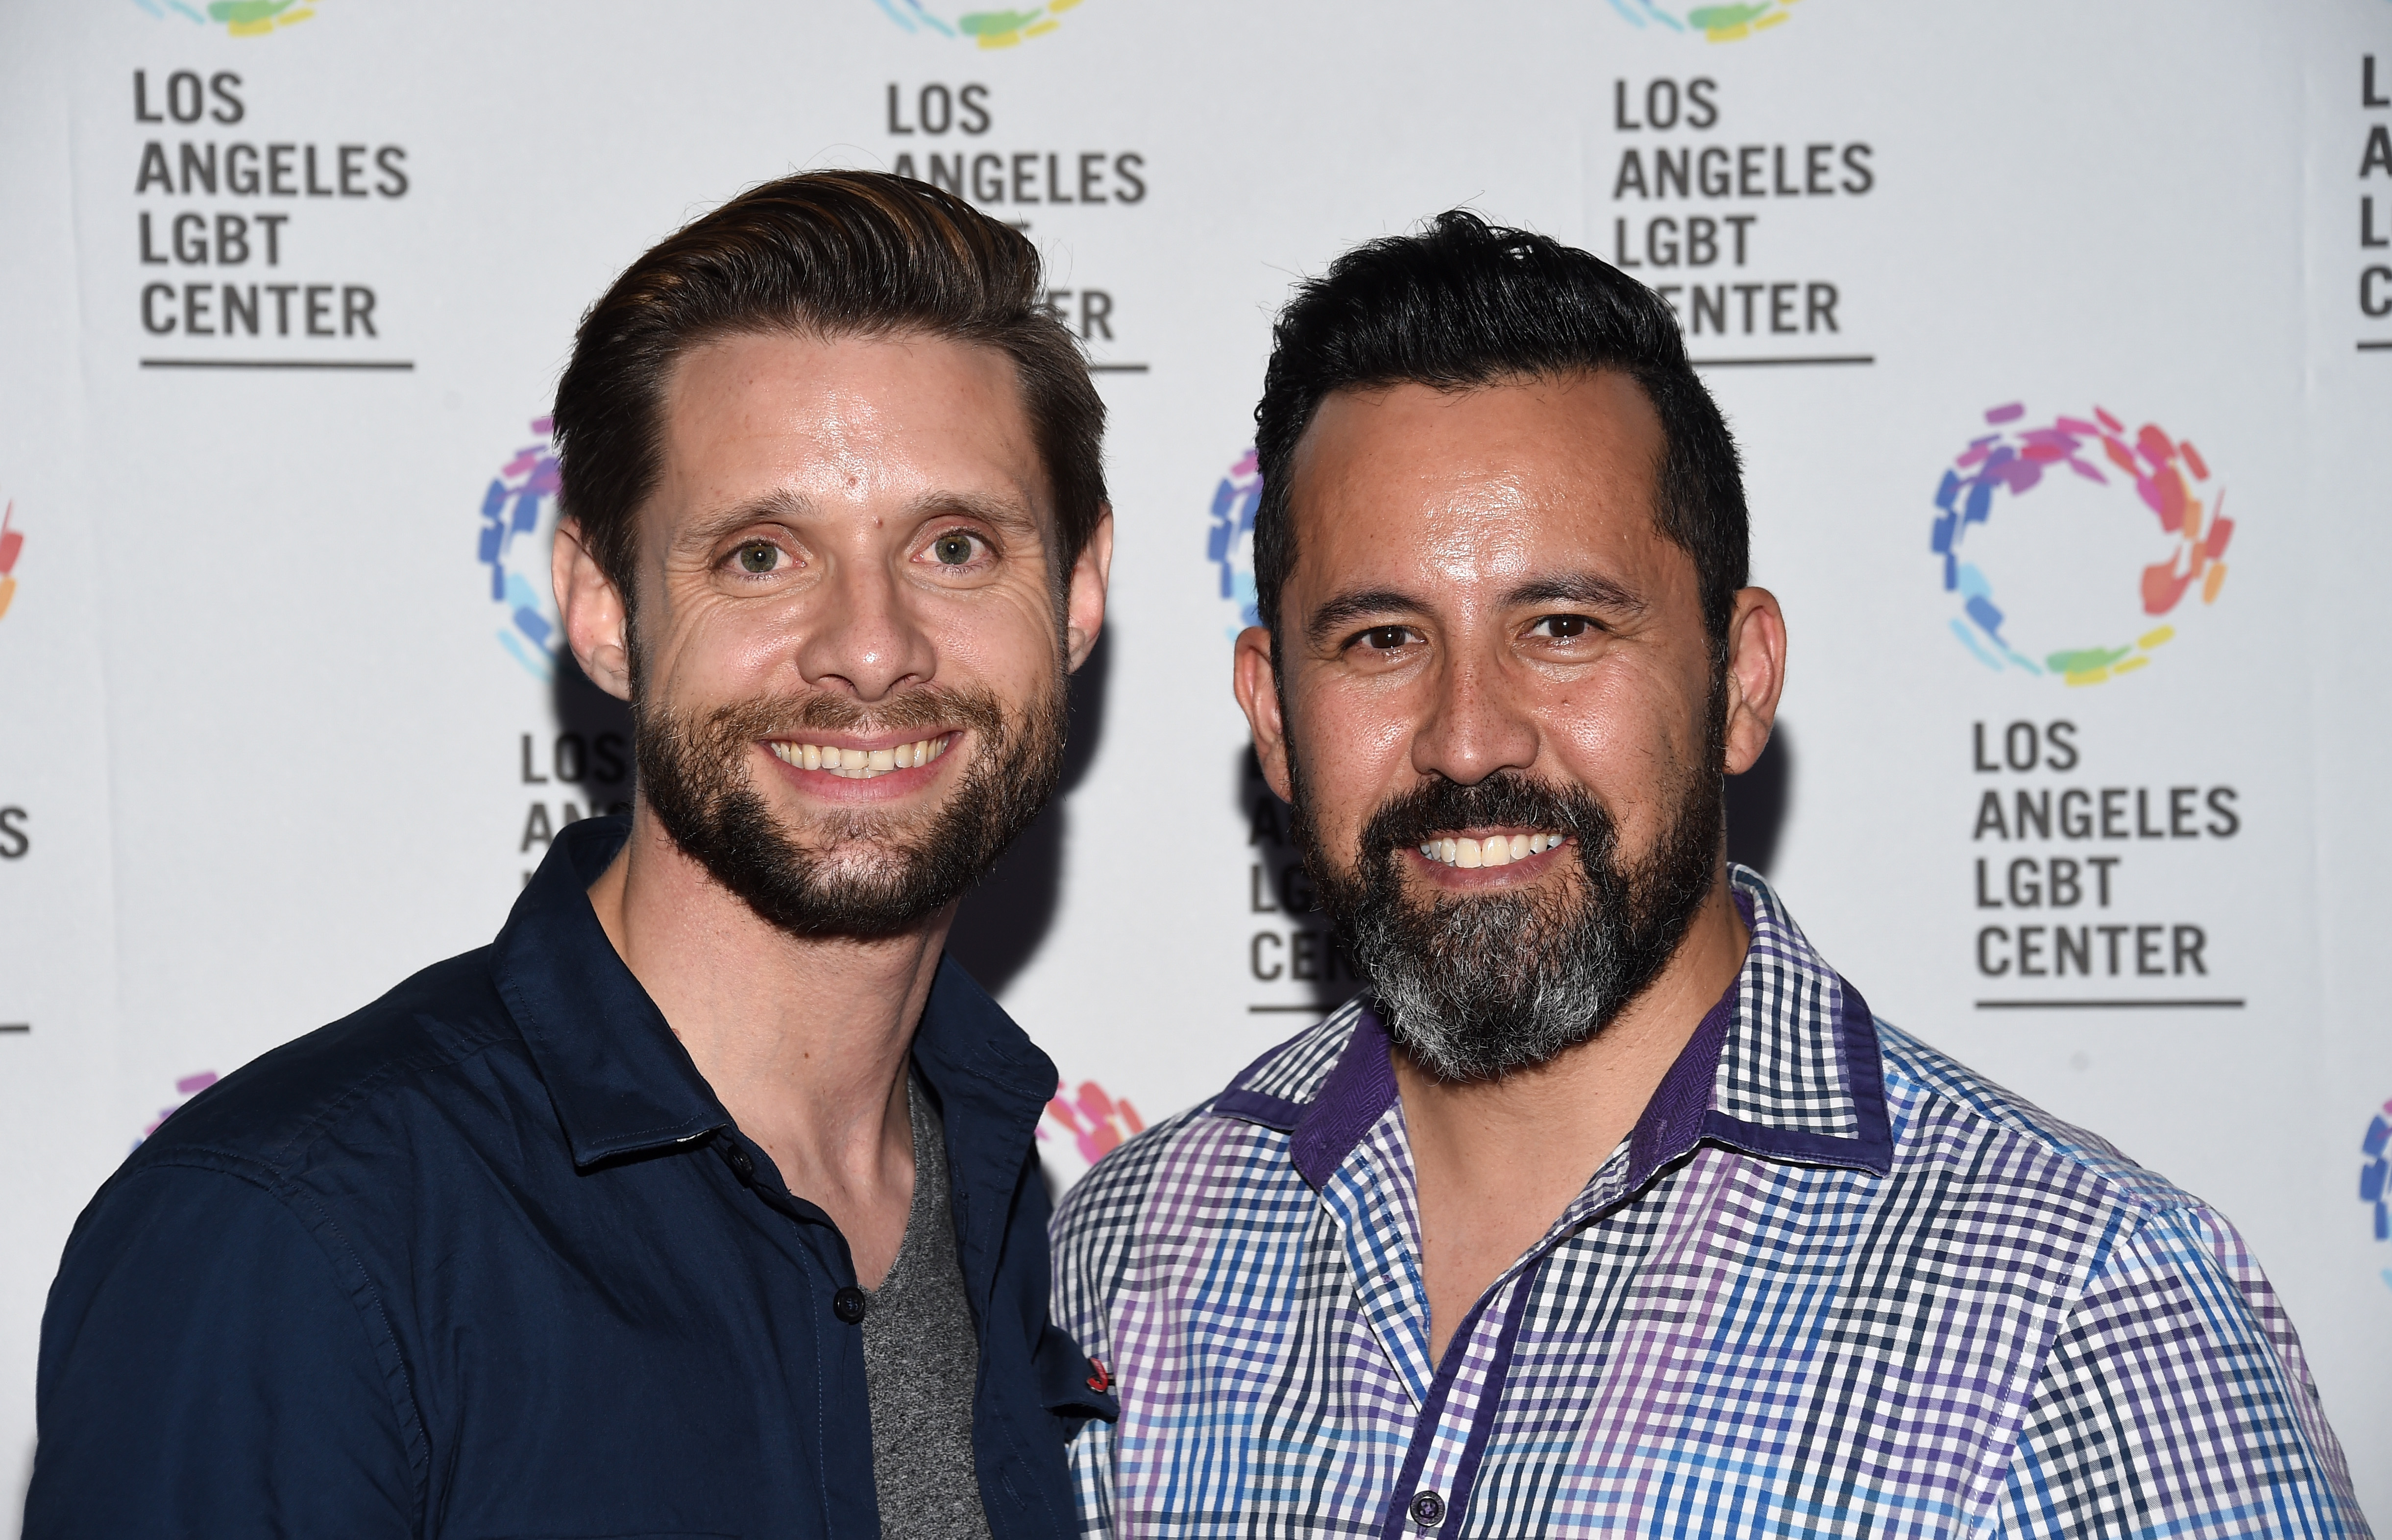 Danny Pintauro and Wil Tabares arrive at the premiere party for Fuse's "Transcendent" at The Village at Ed Gould Plaza on September 28, 2015, in Los Angeles, California. | Source: Getty Images